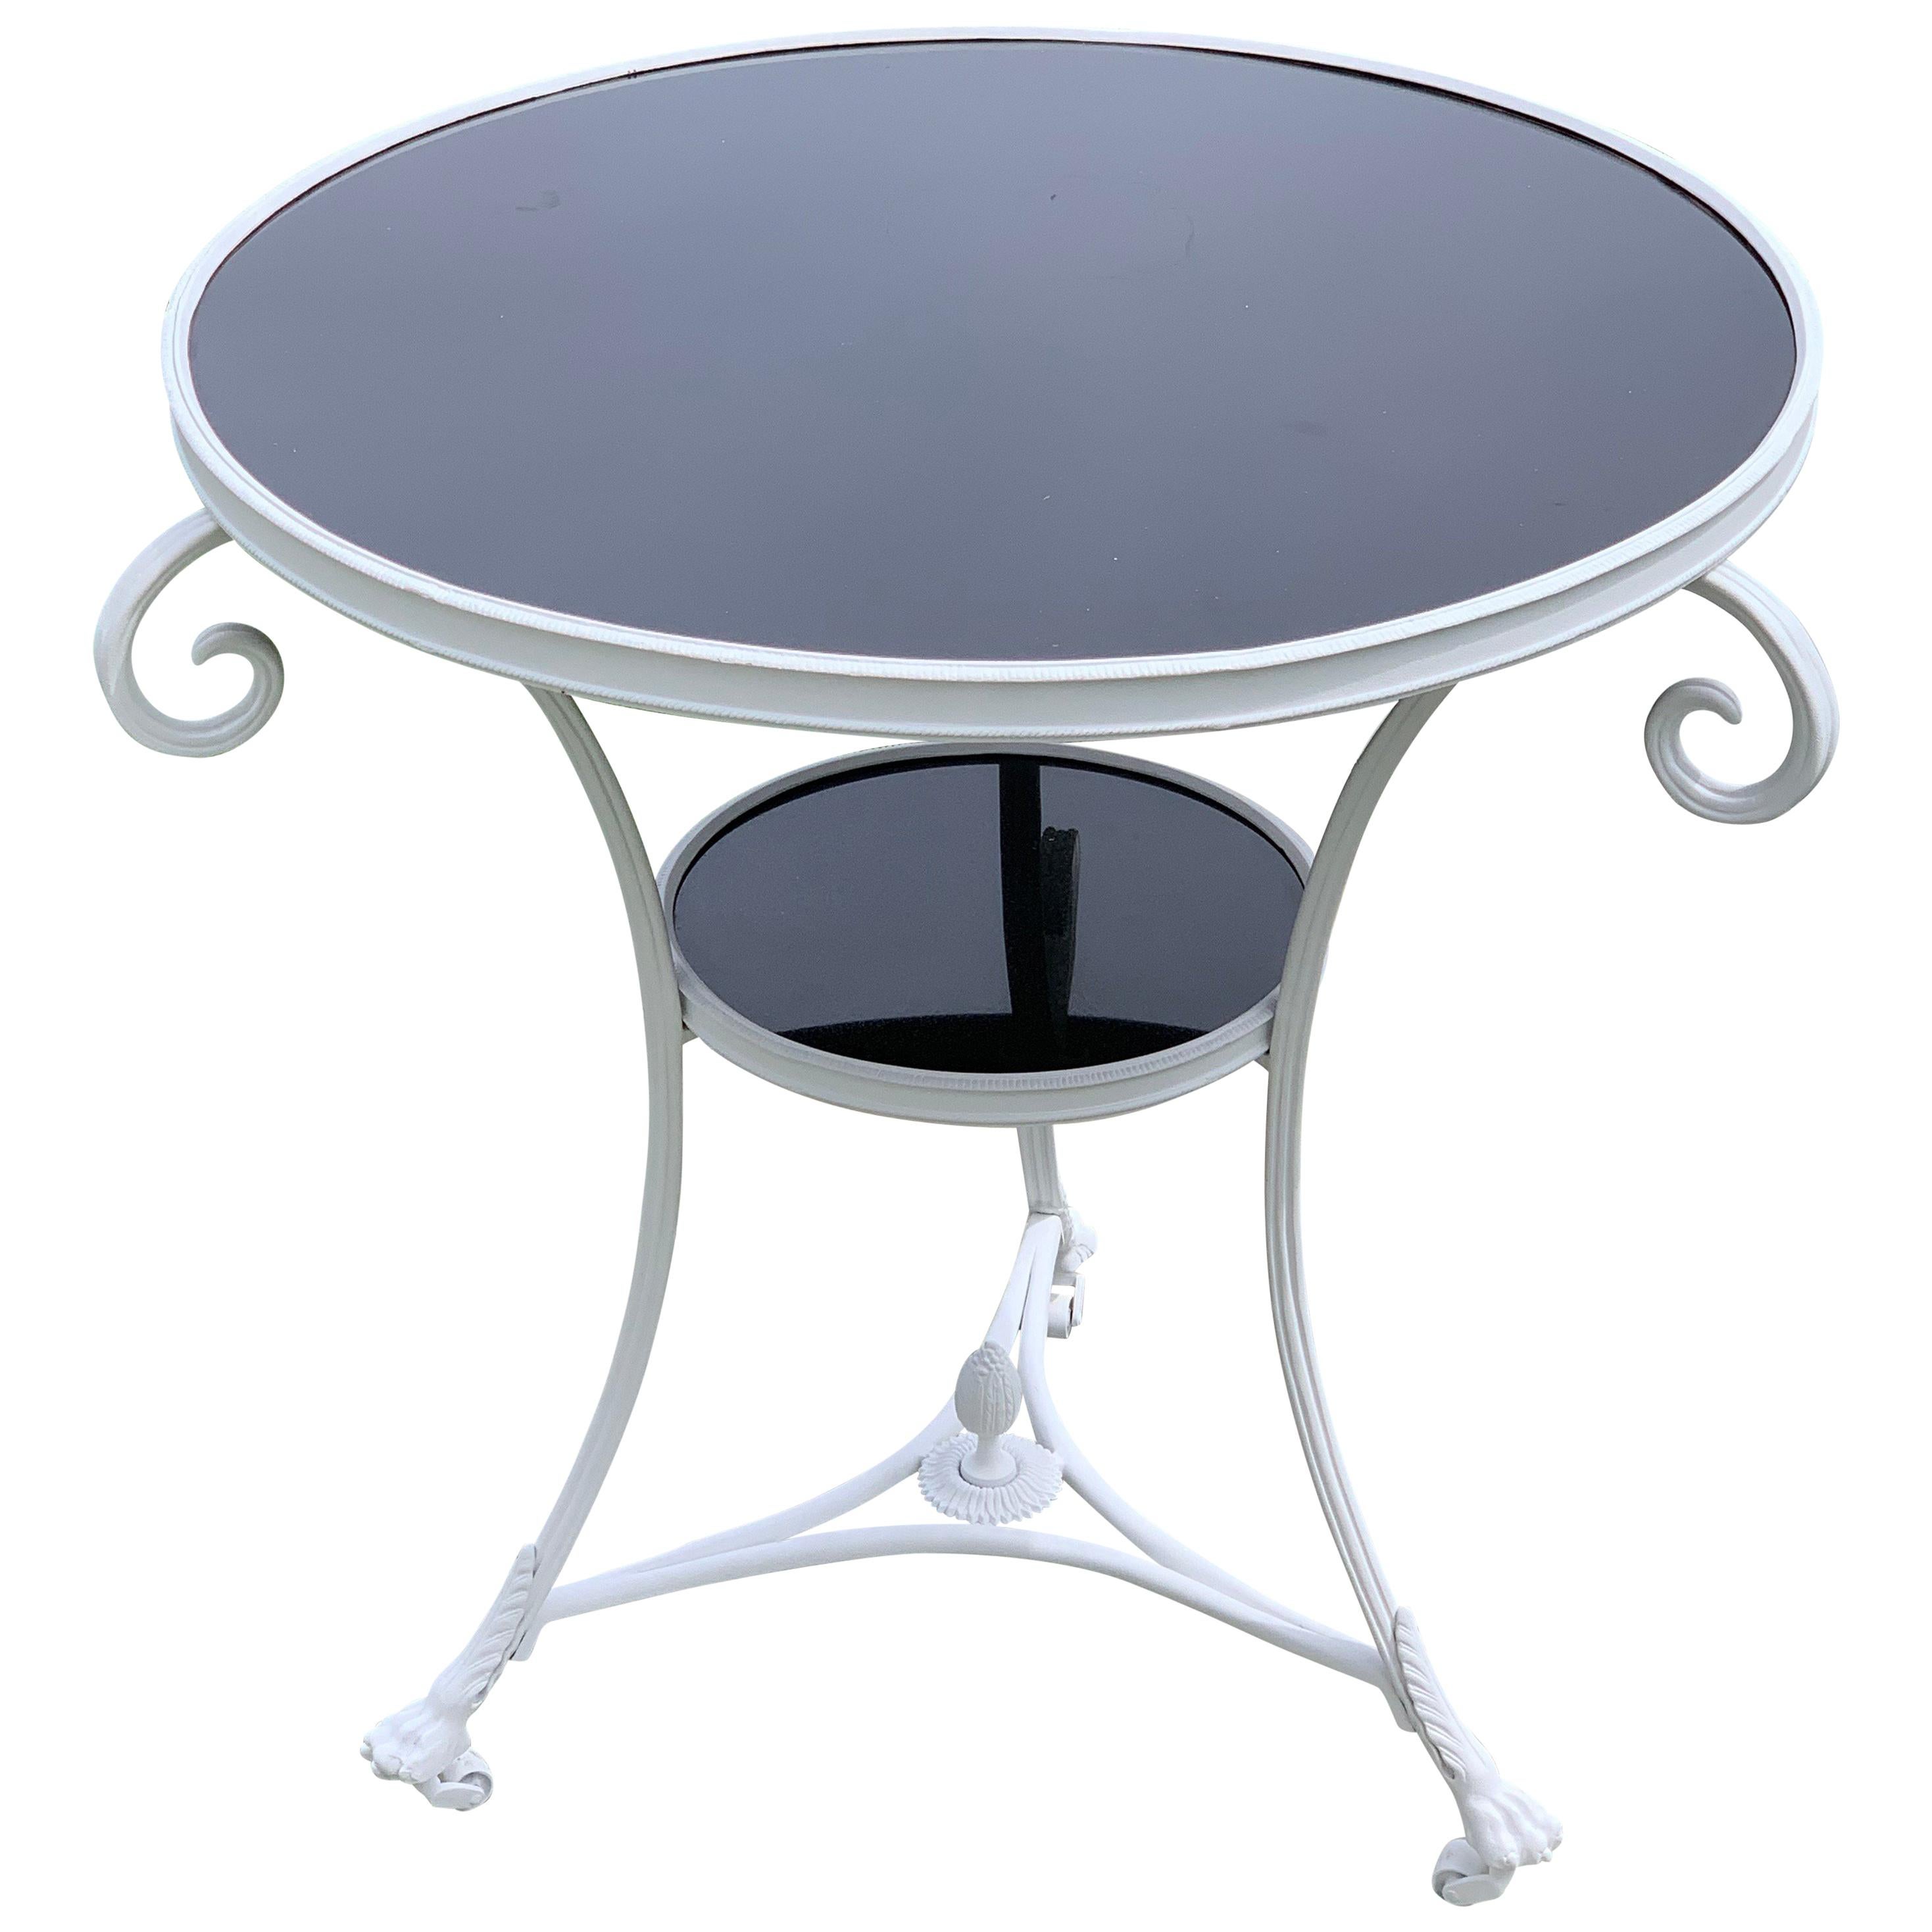 A Modern Black Marble Top Gueridon With a White Base  For Sale